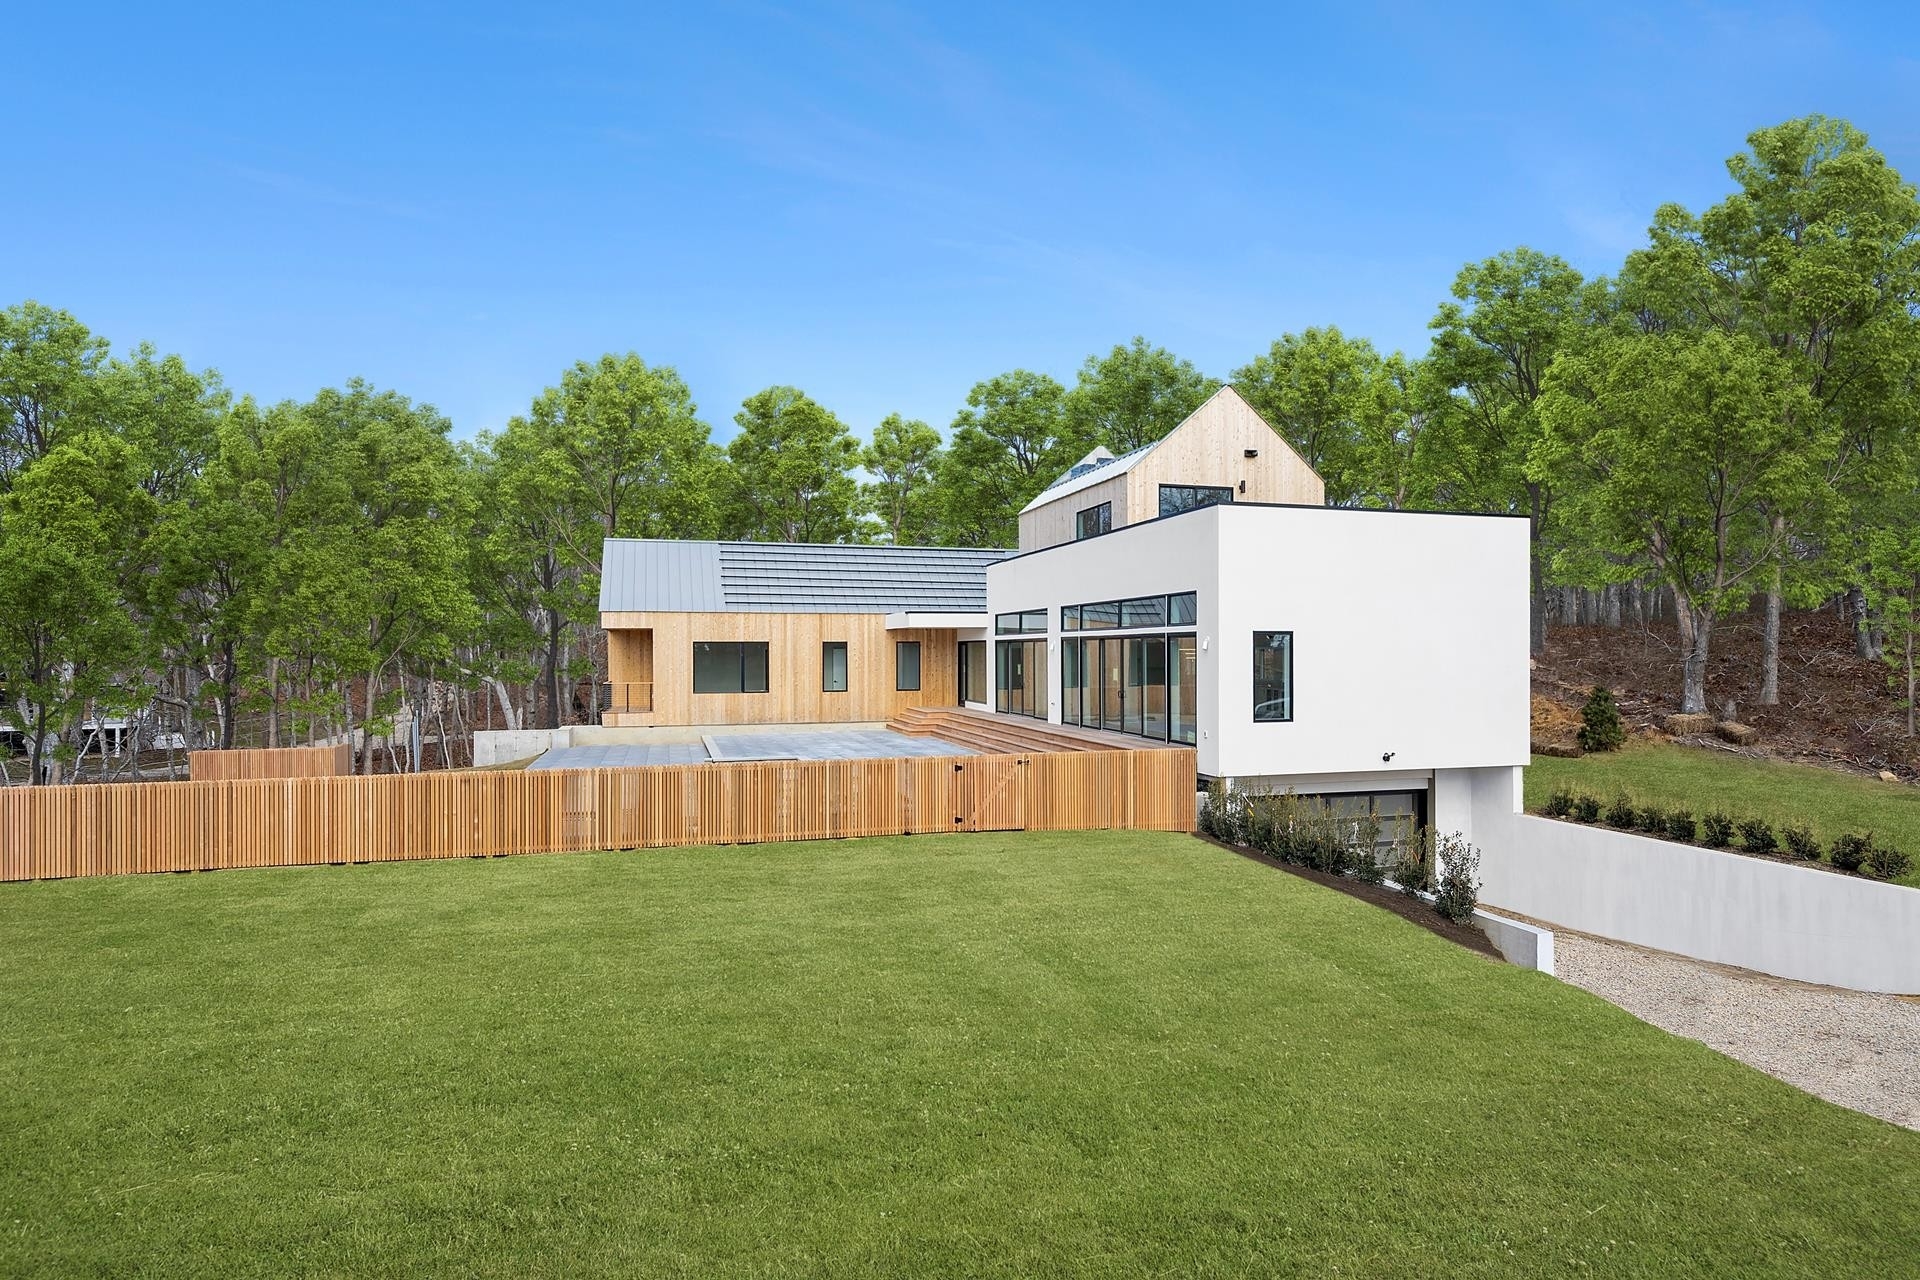 Single Family Home for Sale at Montauk, New York 11954